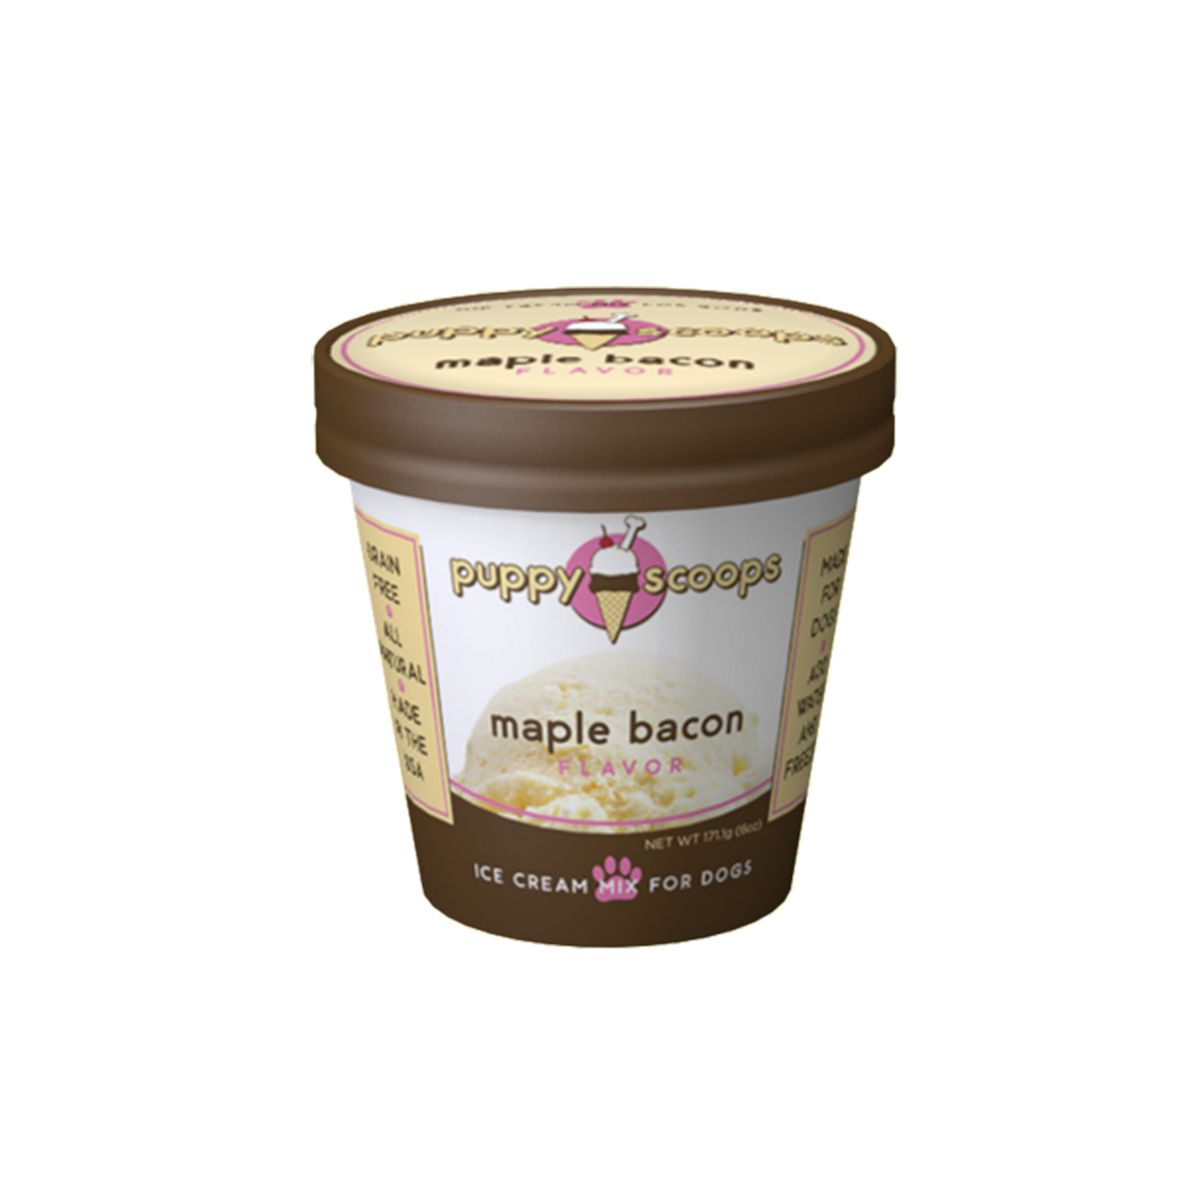 Puppy Scoops Ice Cream Mix - Maple Bacon | Pawlicious & Company